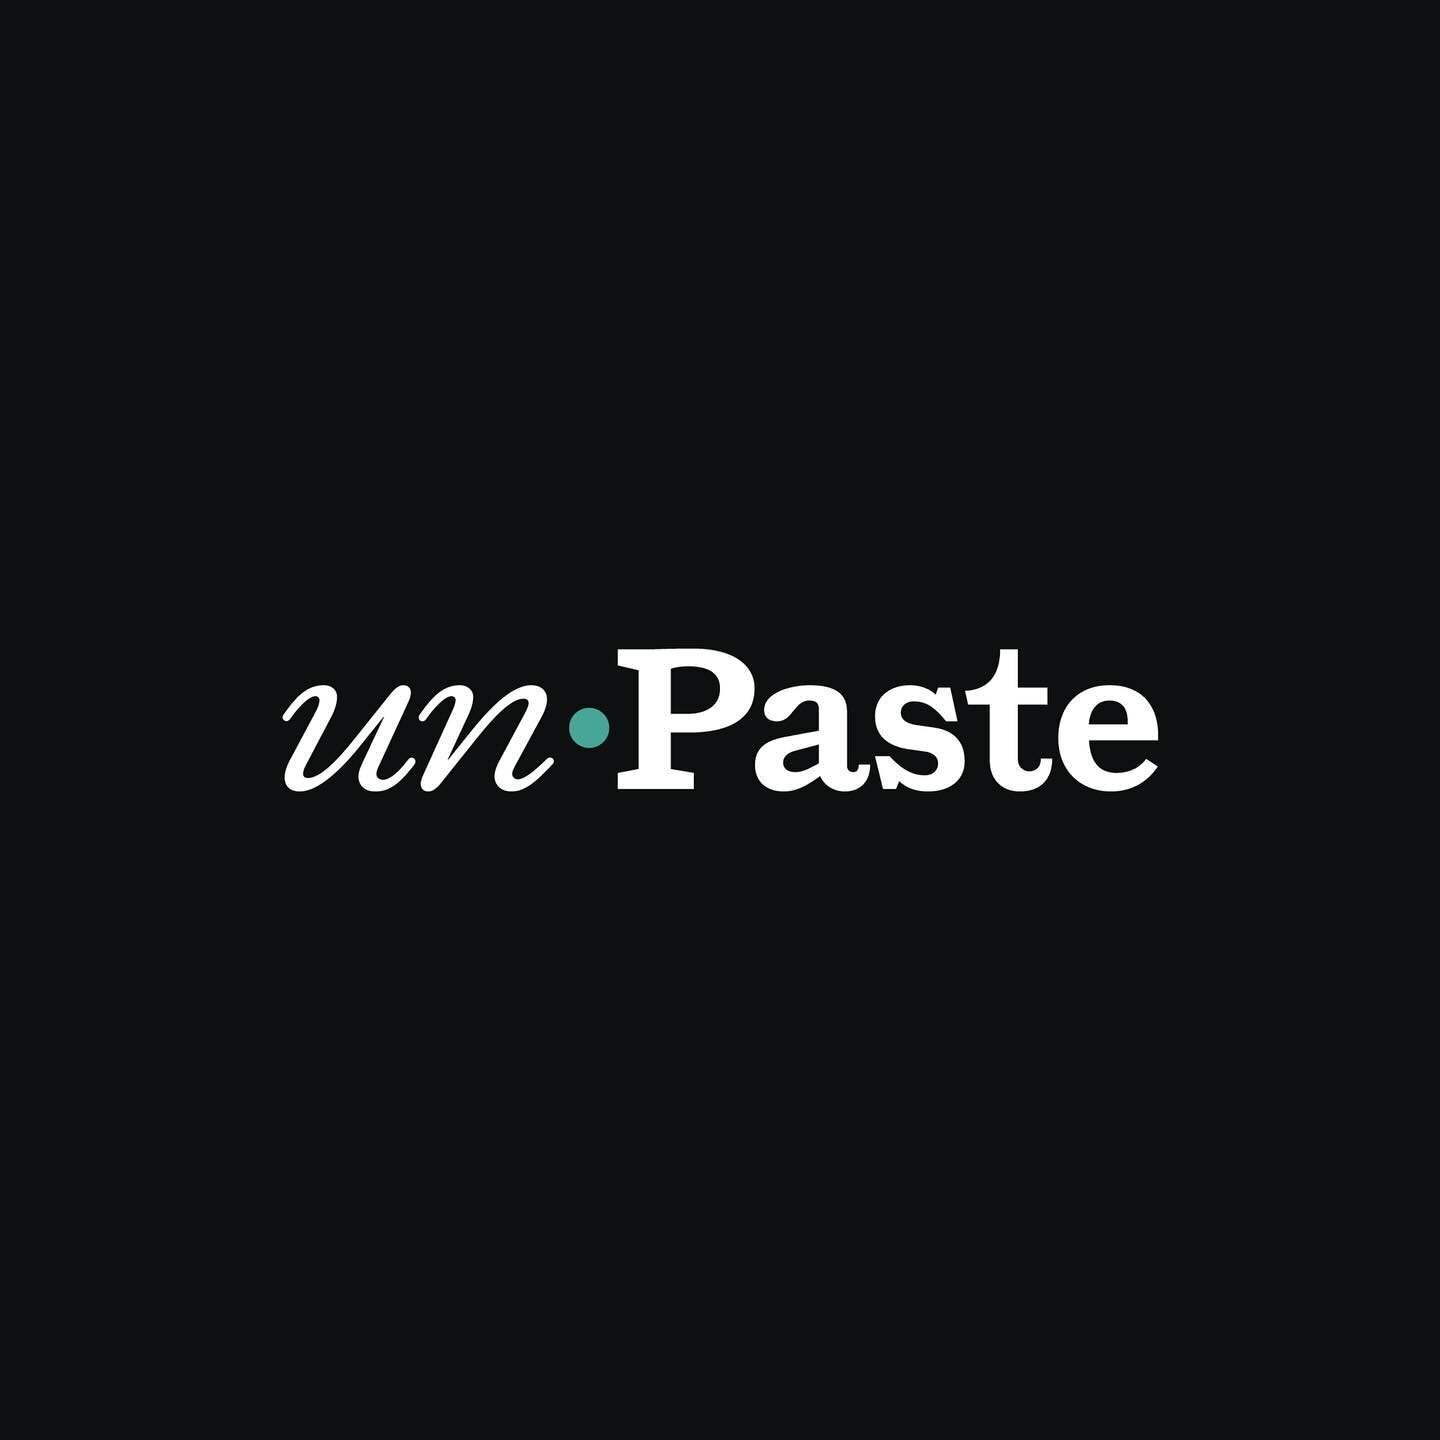 Unpaste &mdash; change brushing for the better.⁠
⁠
Better than toothpaste.⁠
⁠
Yep. We said it. And we have a feeling you&rsquo;ll be saying it too while you walk around with a silly (and blindingly bright) smile on your face.⁠
⁠
&rdquo;Unpaste&rdquo;